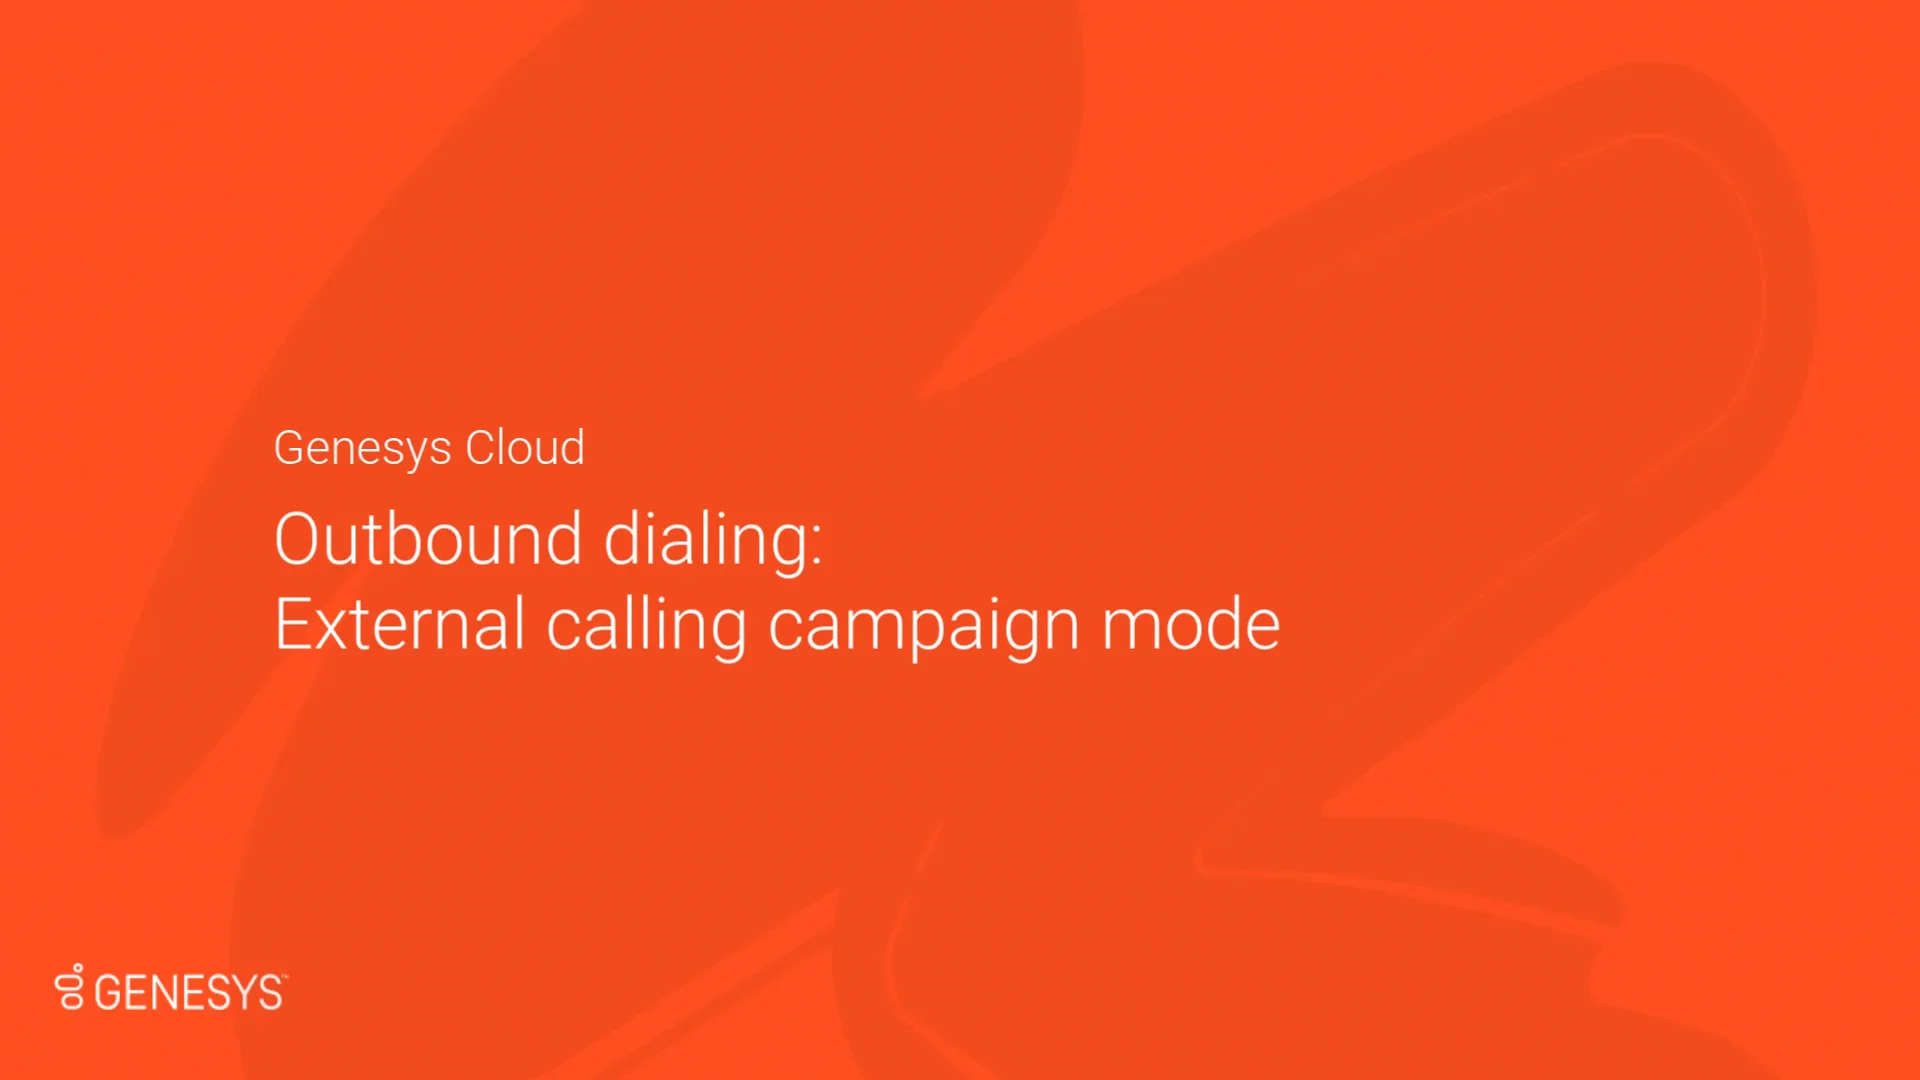 Genesys Cloud Outbound Campaigns: External calling campaign mode